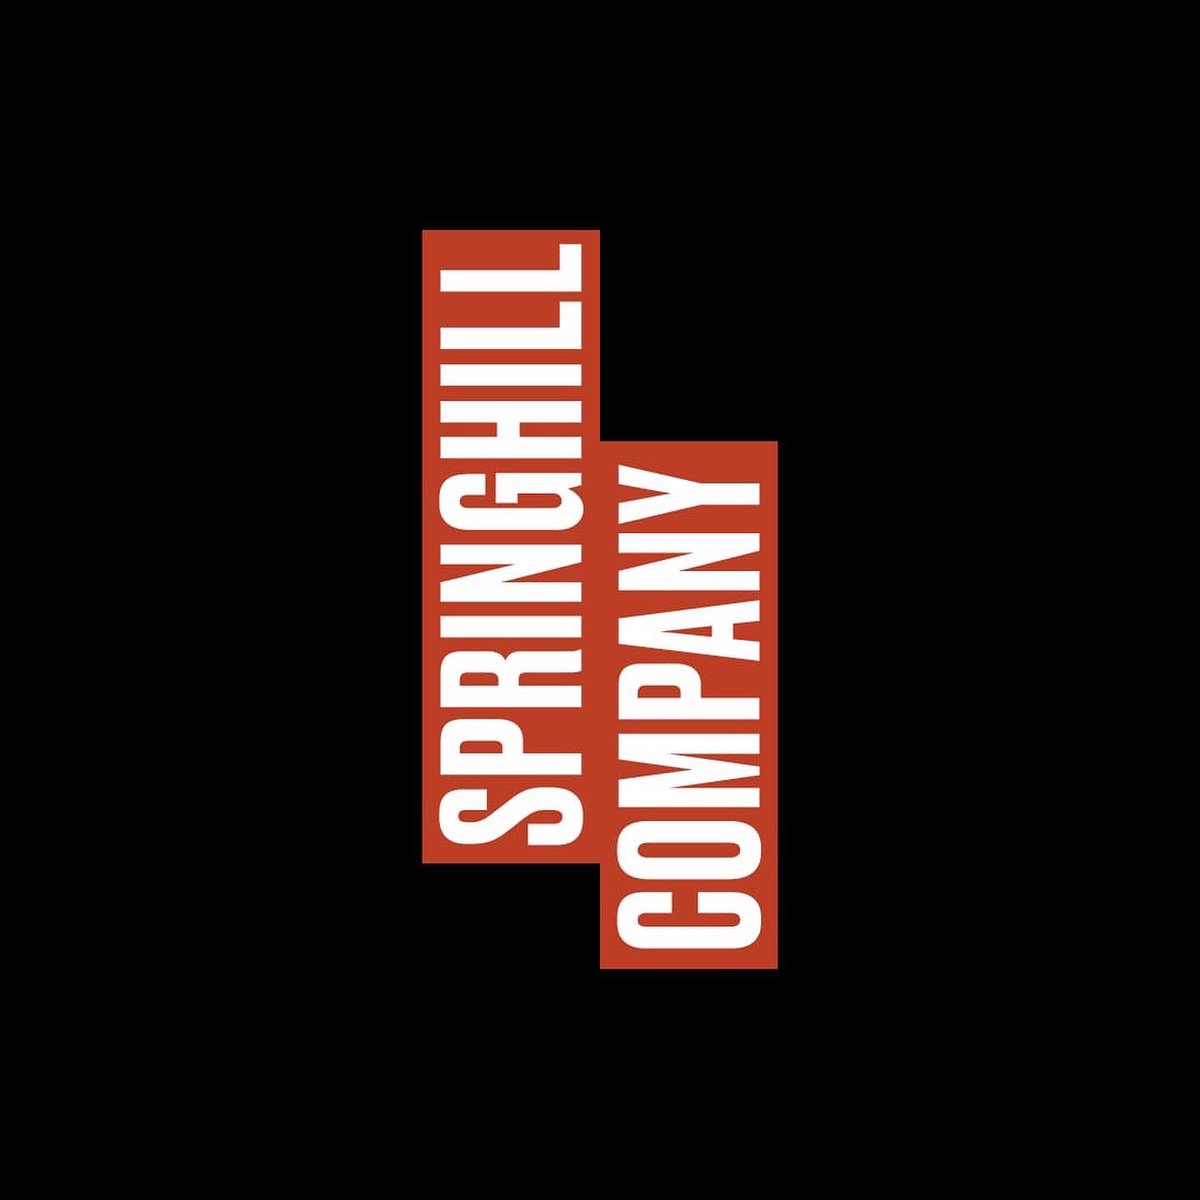 Ready for this moment. Beyond thrilled to announce I’ve joined @KingJames & @mavcarter’s entertainment platform, @TheSpringHillCo today as a Jr Creative 🙏🏽 Blessed to be working with some of the best in the biz, let’s get this show on the road. See you soon NYC 🏙